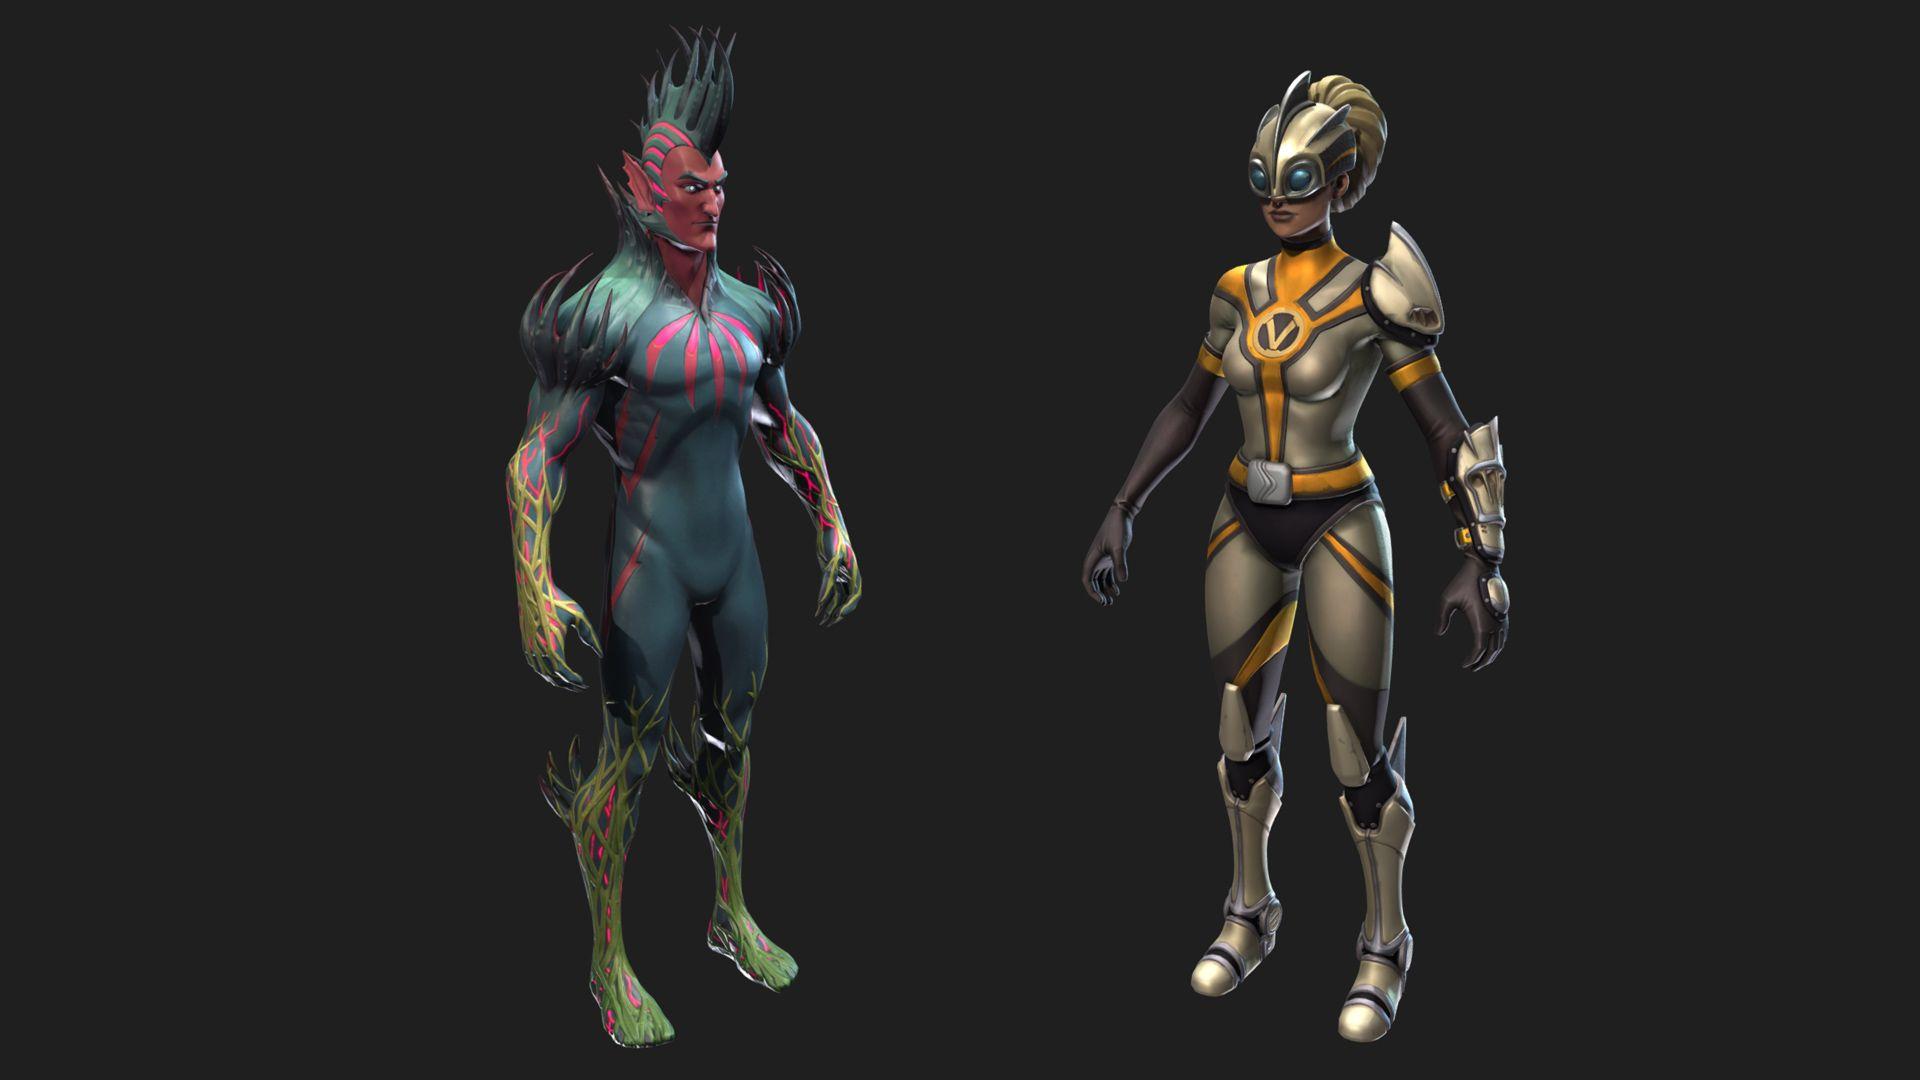 3D models for the upcoming skins found in Patch v4.3.0